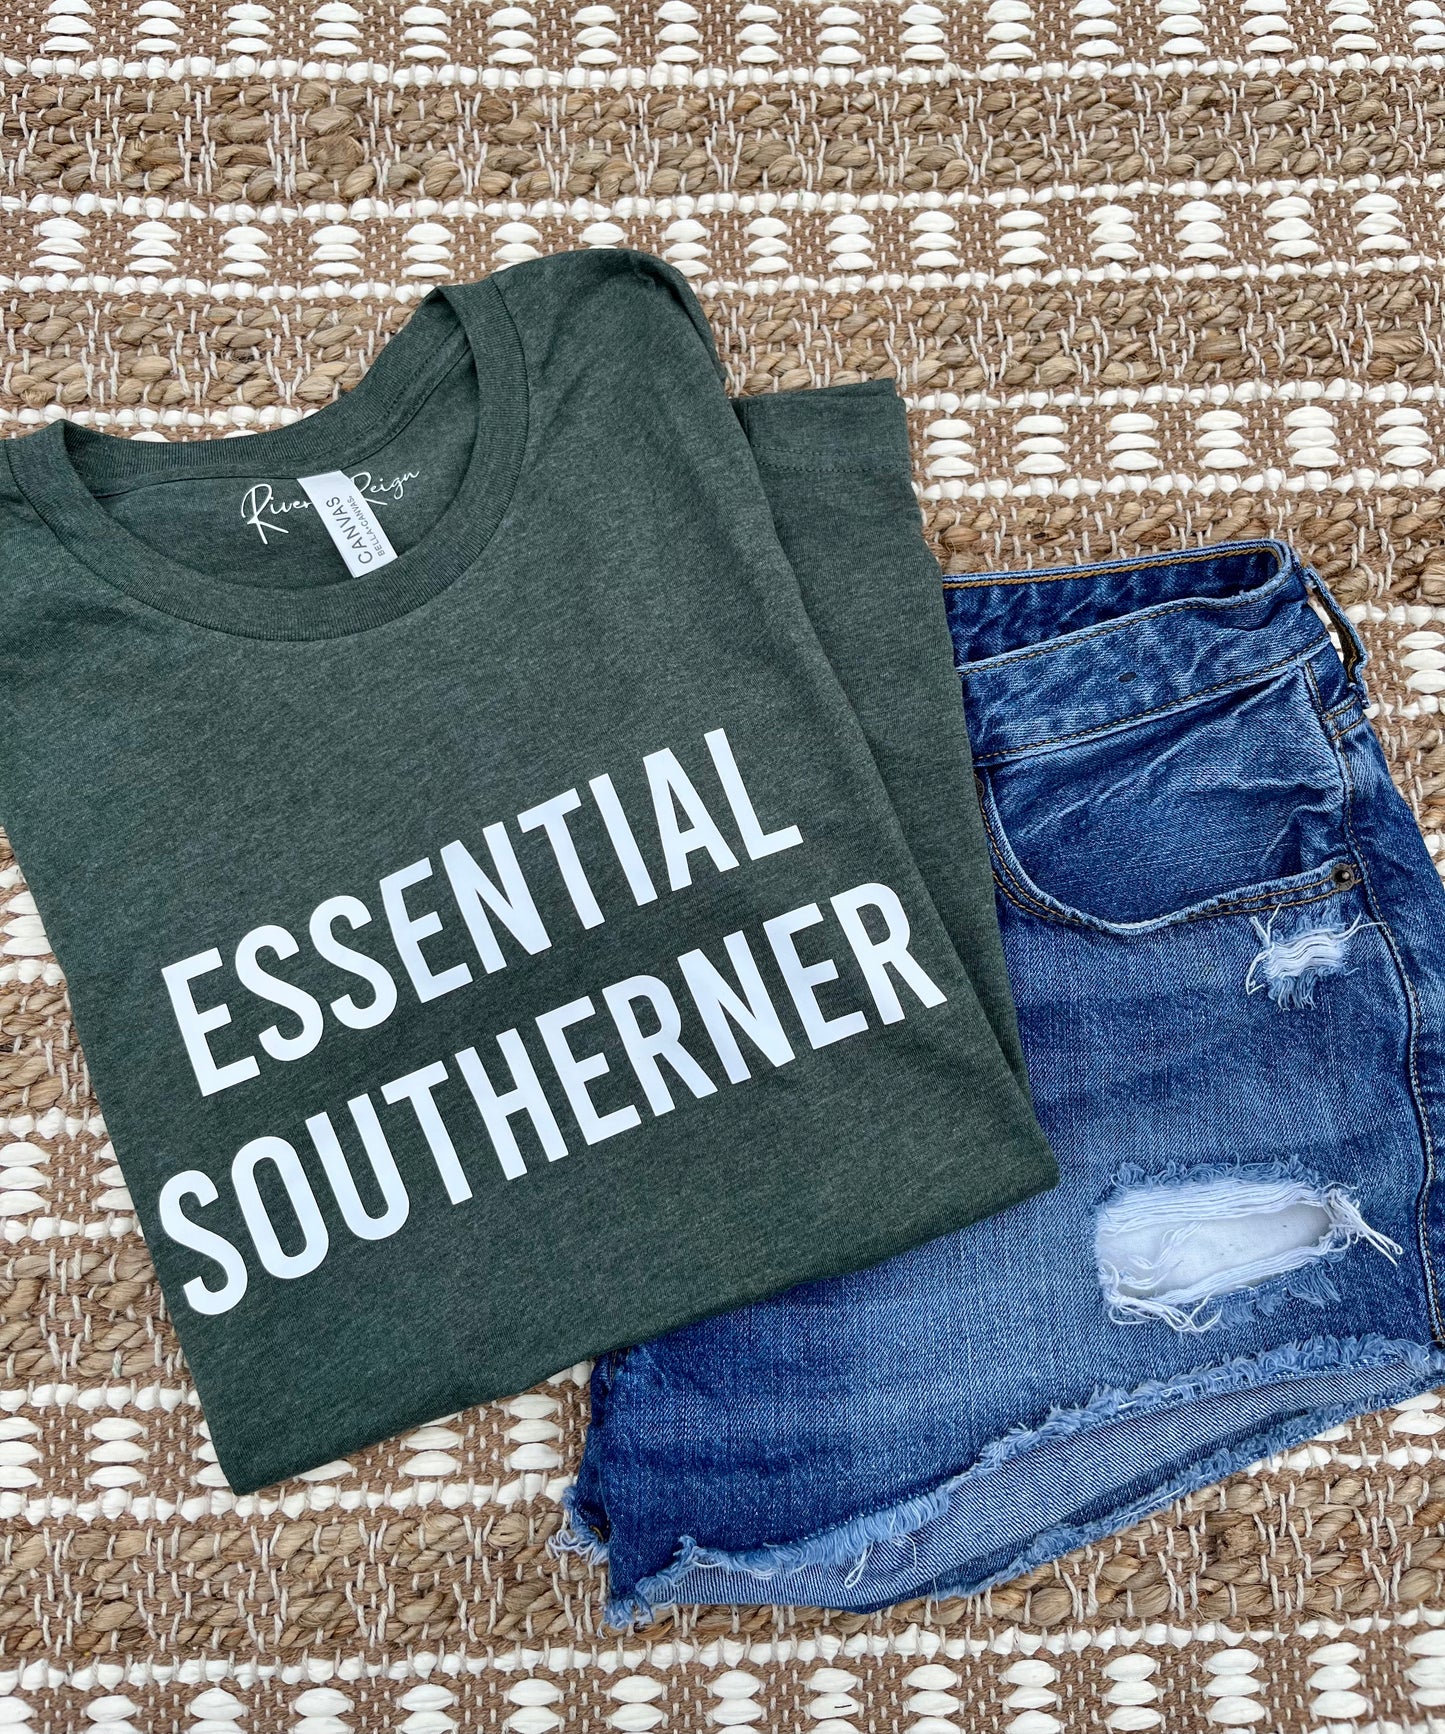 Essential Southerner